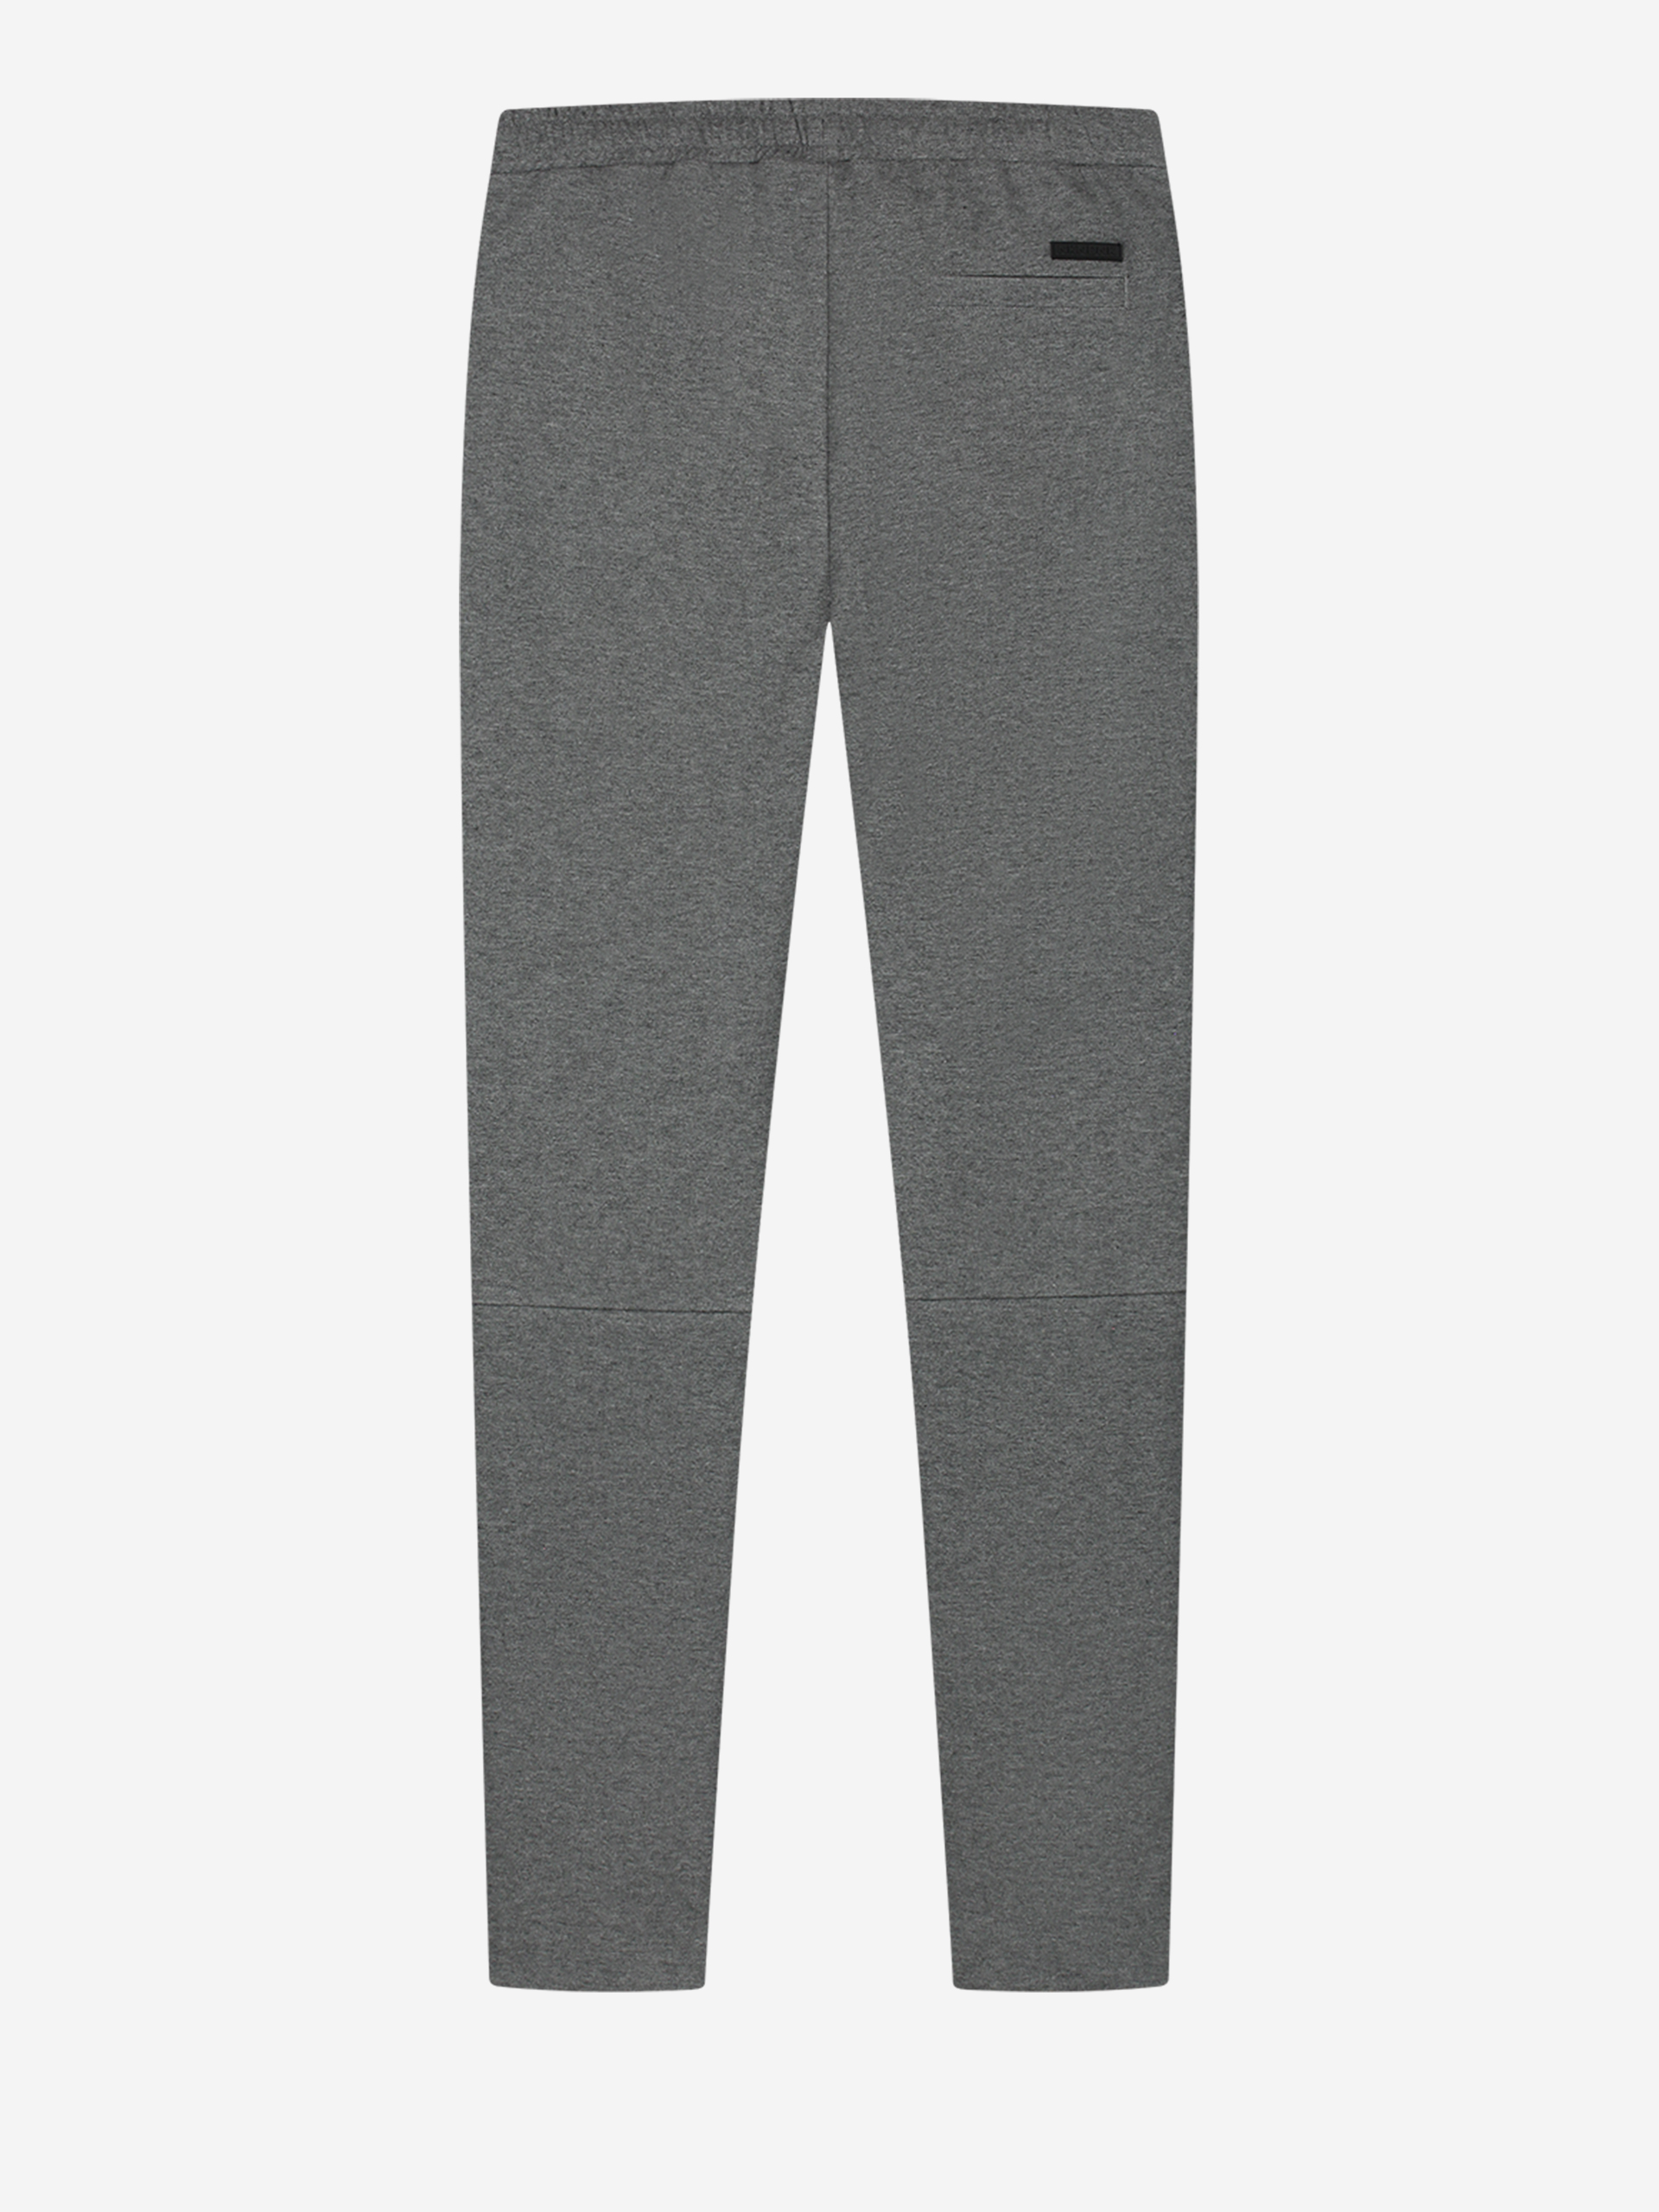 Fitted Sweatpants with mid rise